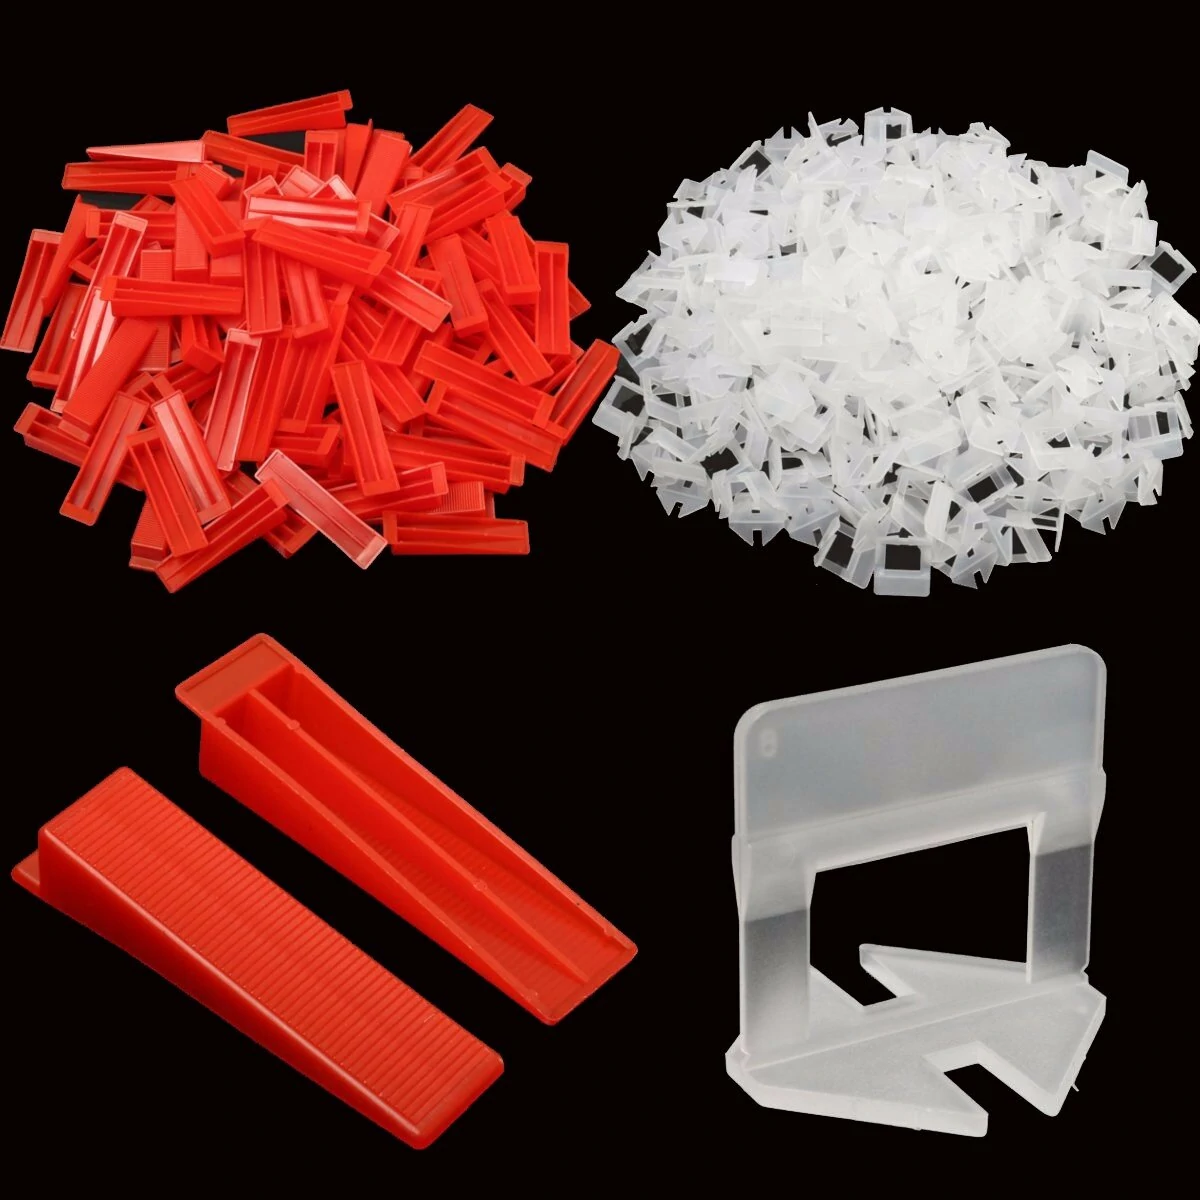 600 tile leveling system wedges and clips spacer plastic tiling tools